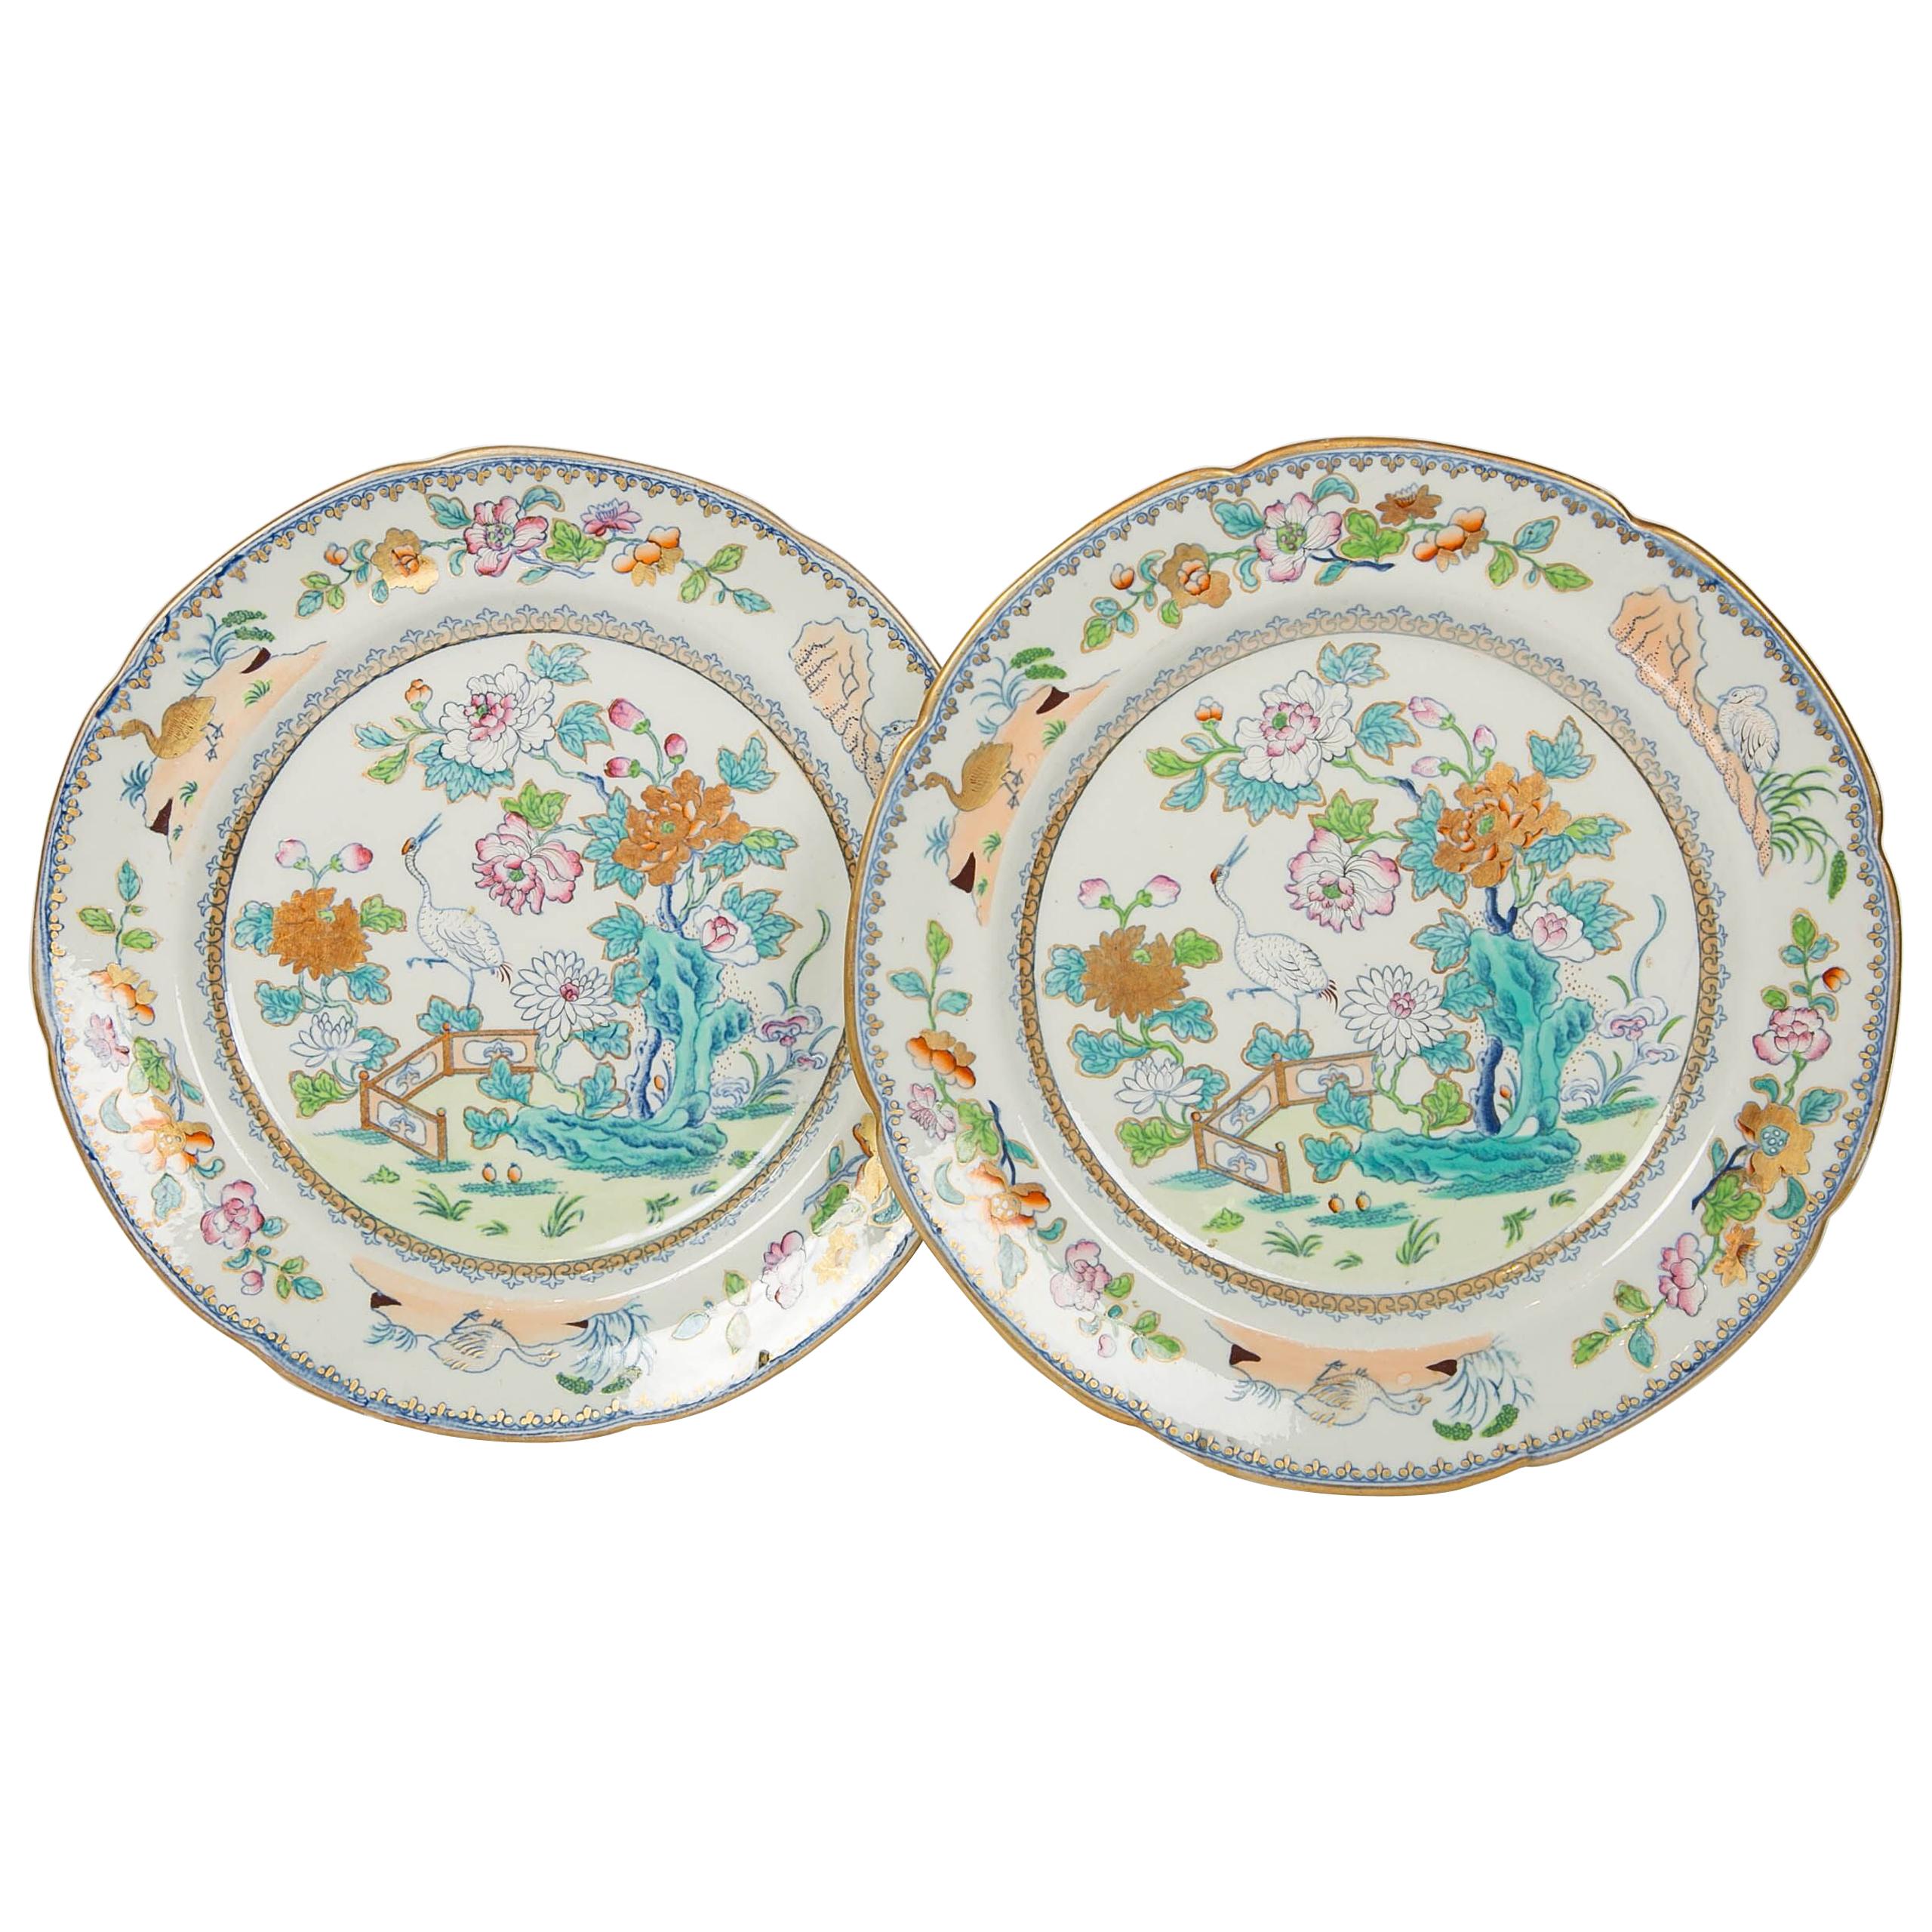 Pair of Davenport Plates with a Chinoiserie Design Turquoise and Pink